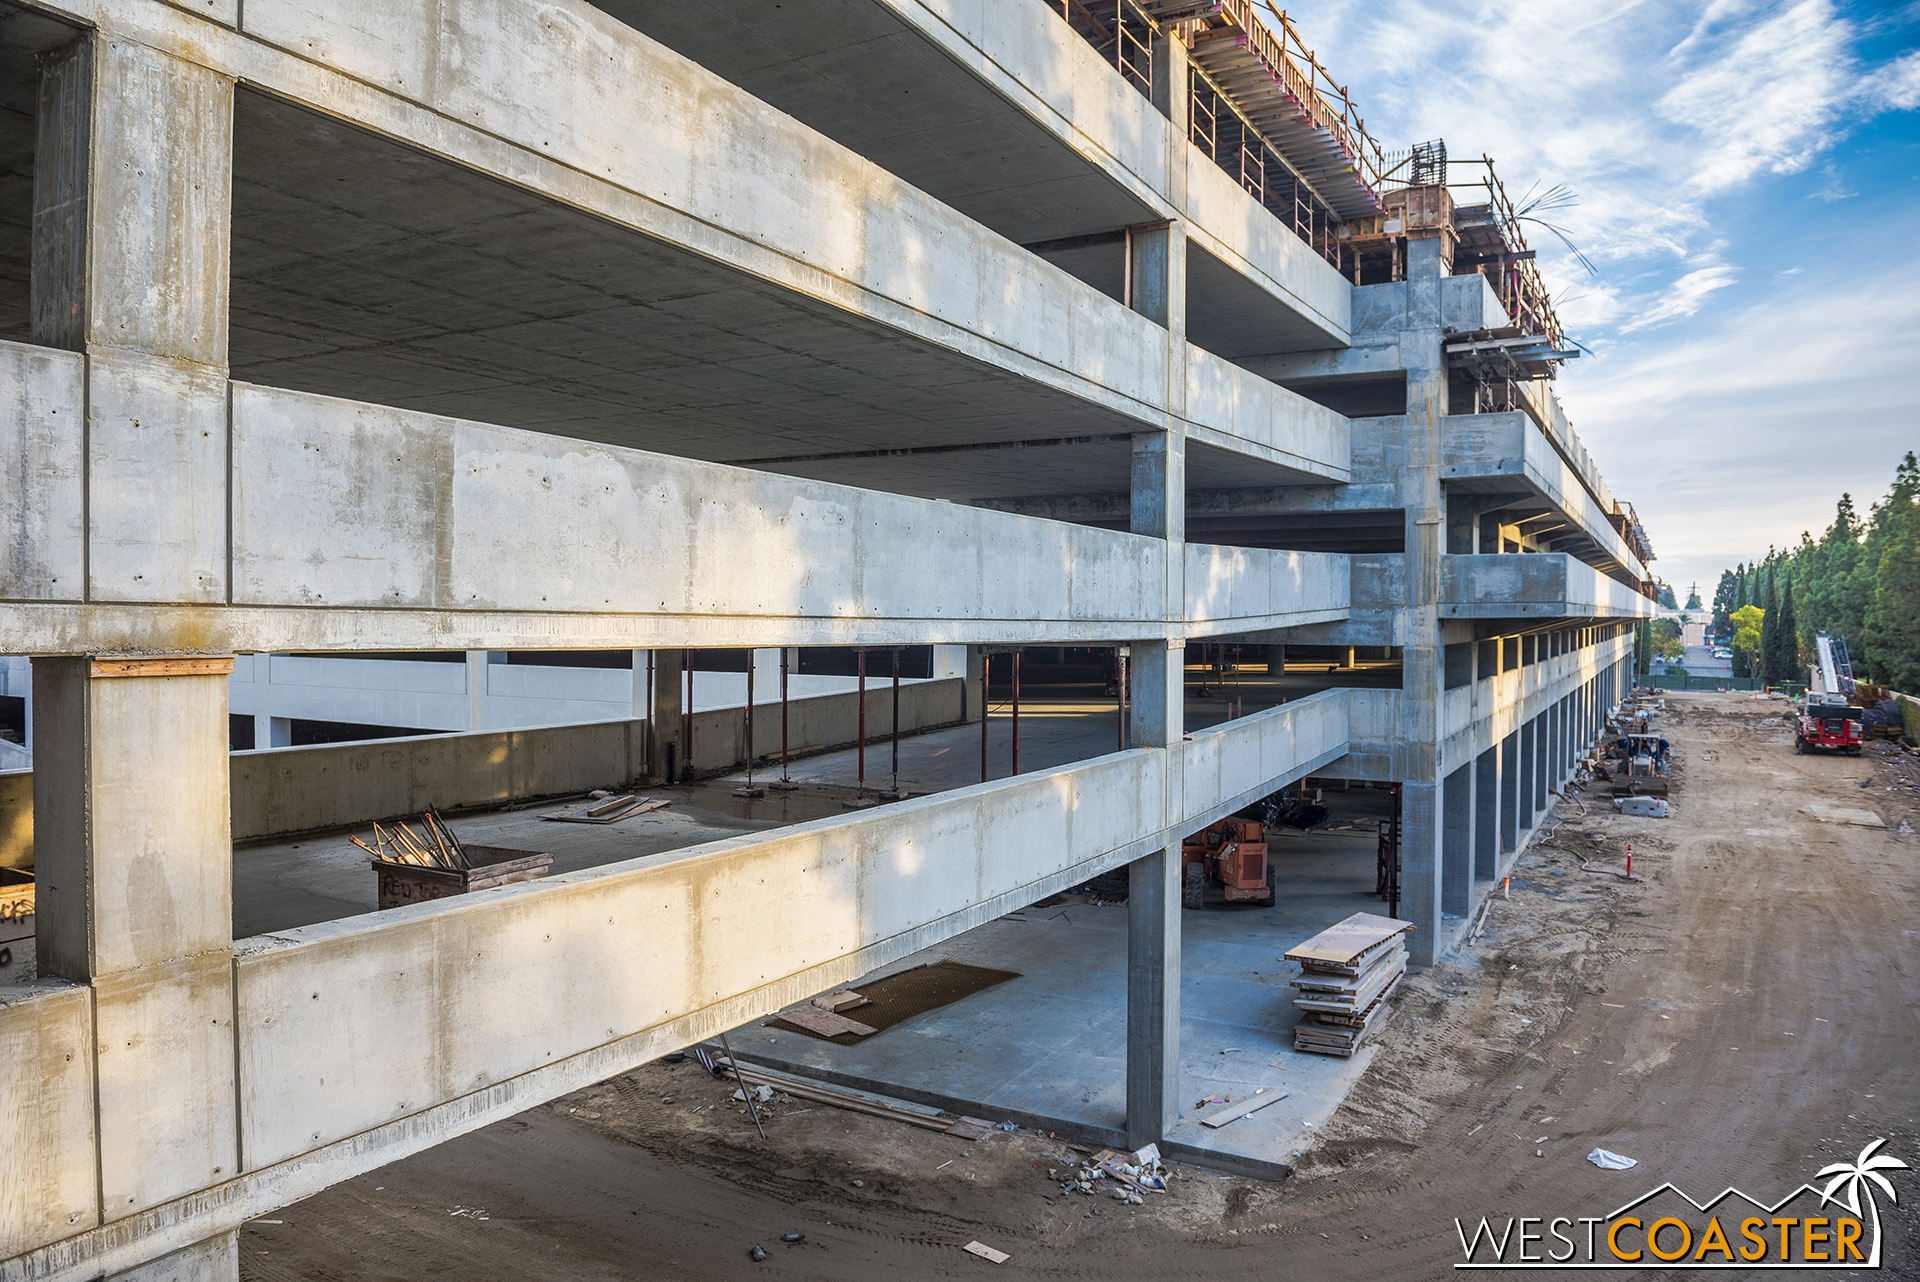  Looking out, we see this.  The west connector between old and new structure has progressed to the sixth floor. 